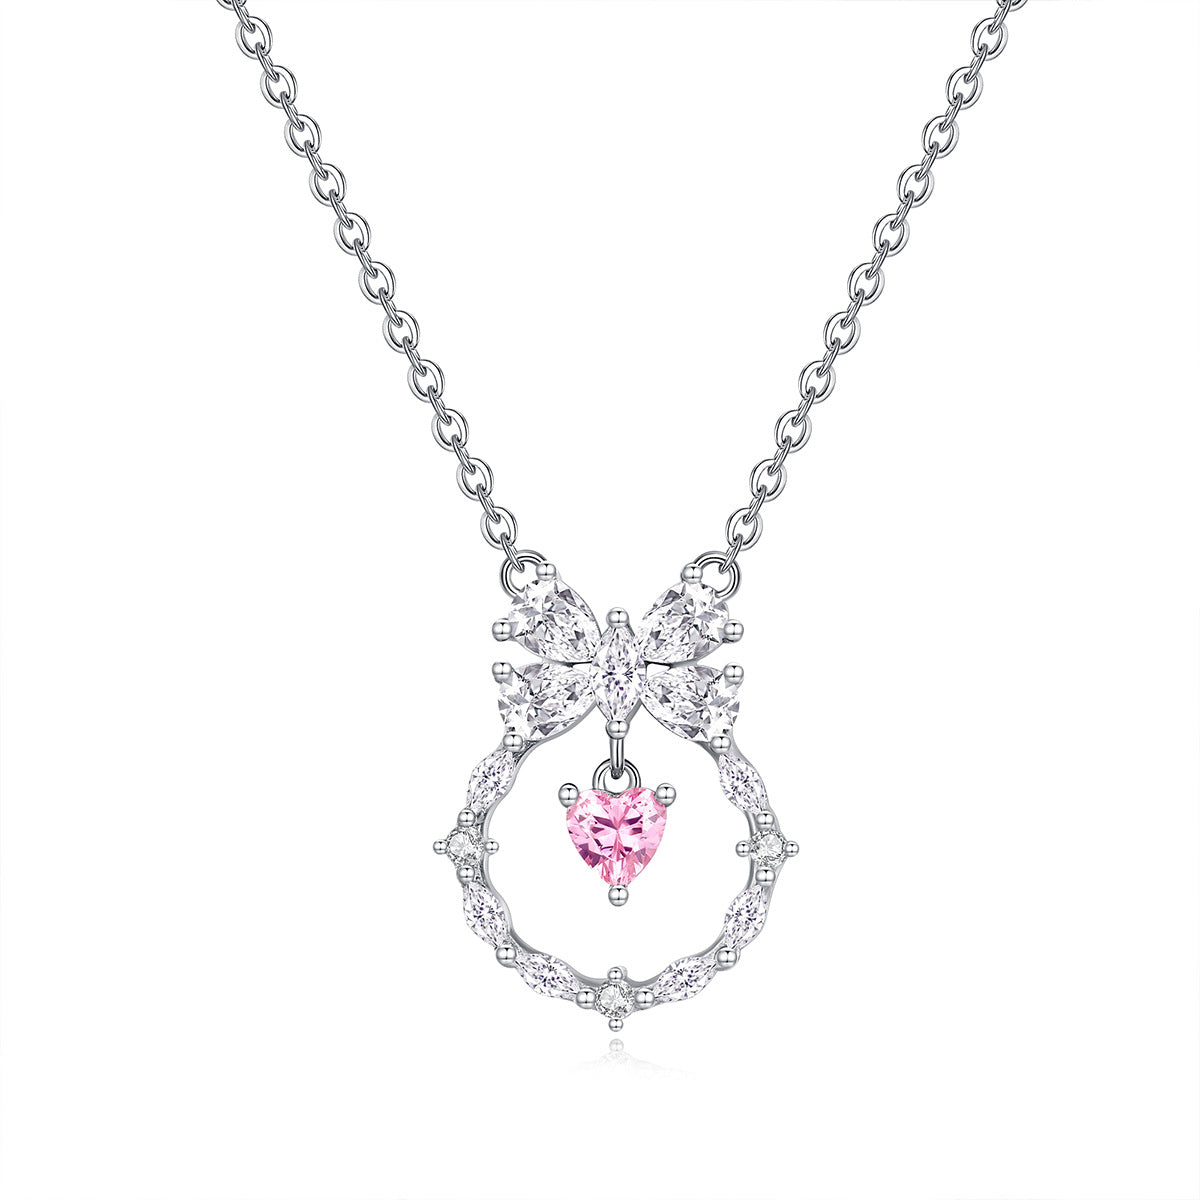 A woman in a pink dress wearing a Maramalive™ Women's Fashionable All-match Sterling Silver Zircon Pendant Necklace.